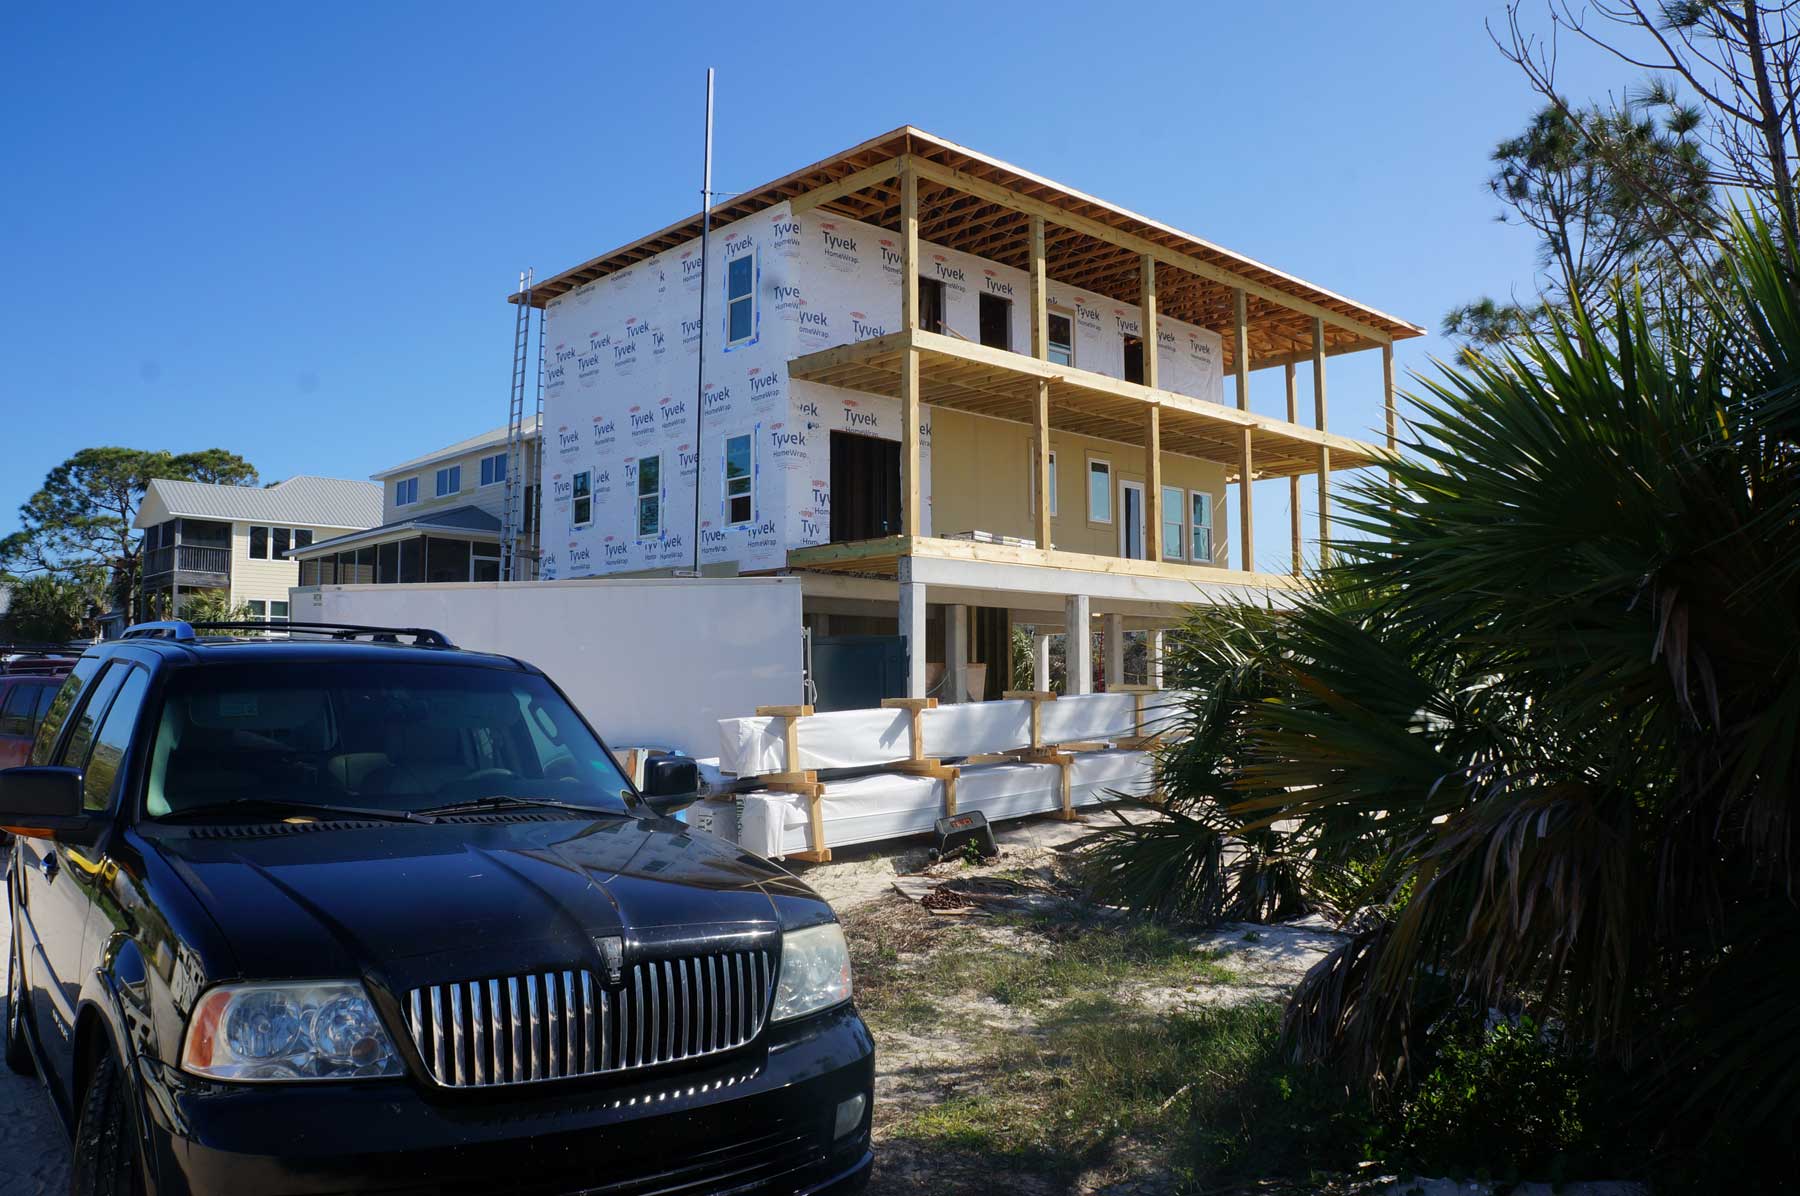 Corner view of home under construction in Mexico Beach, FL.